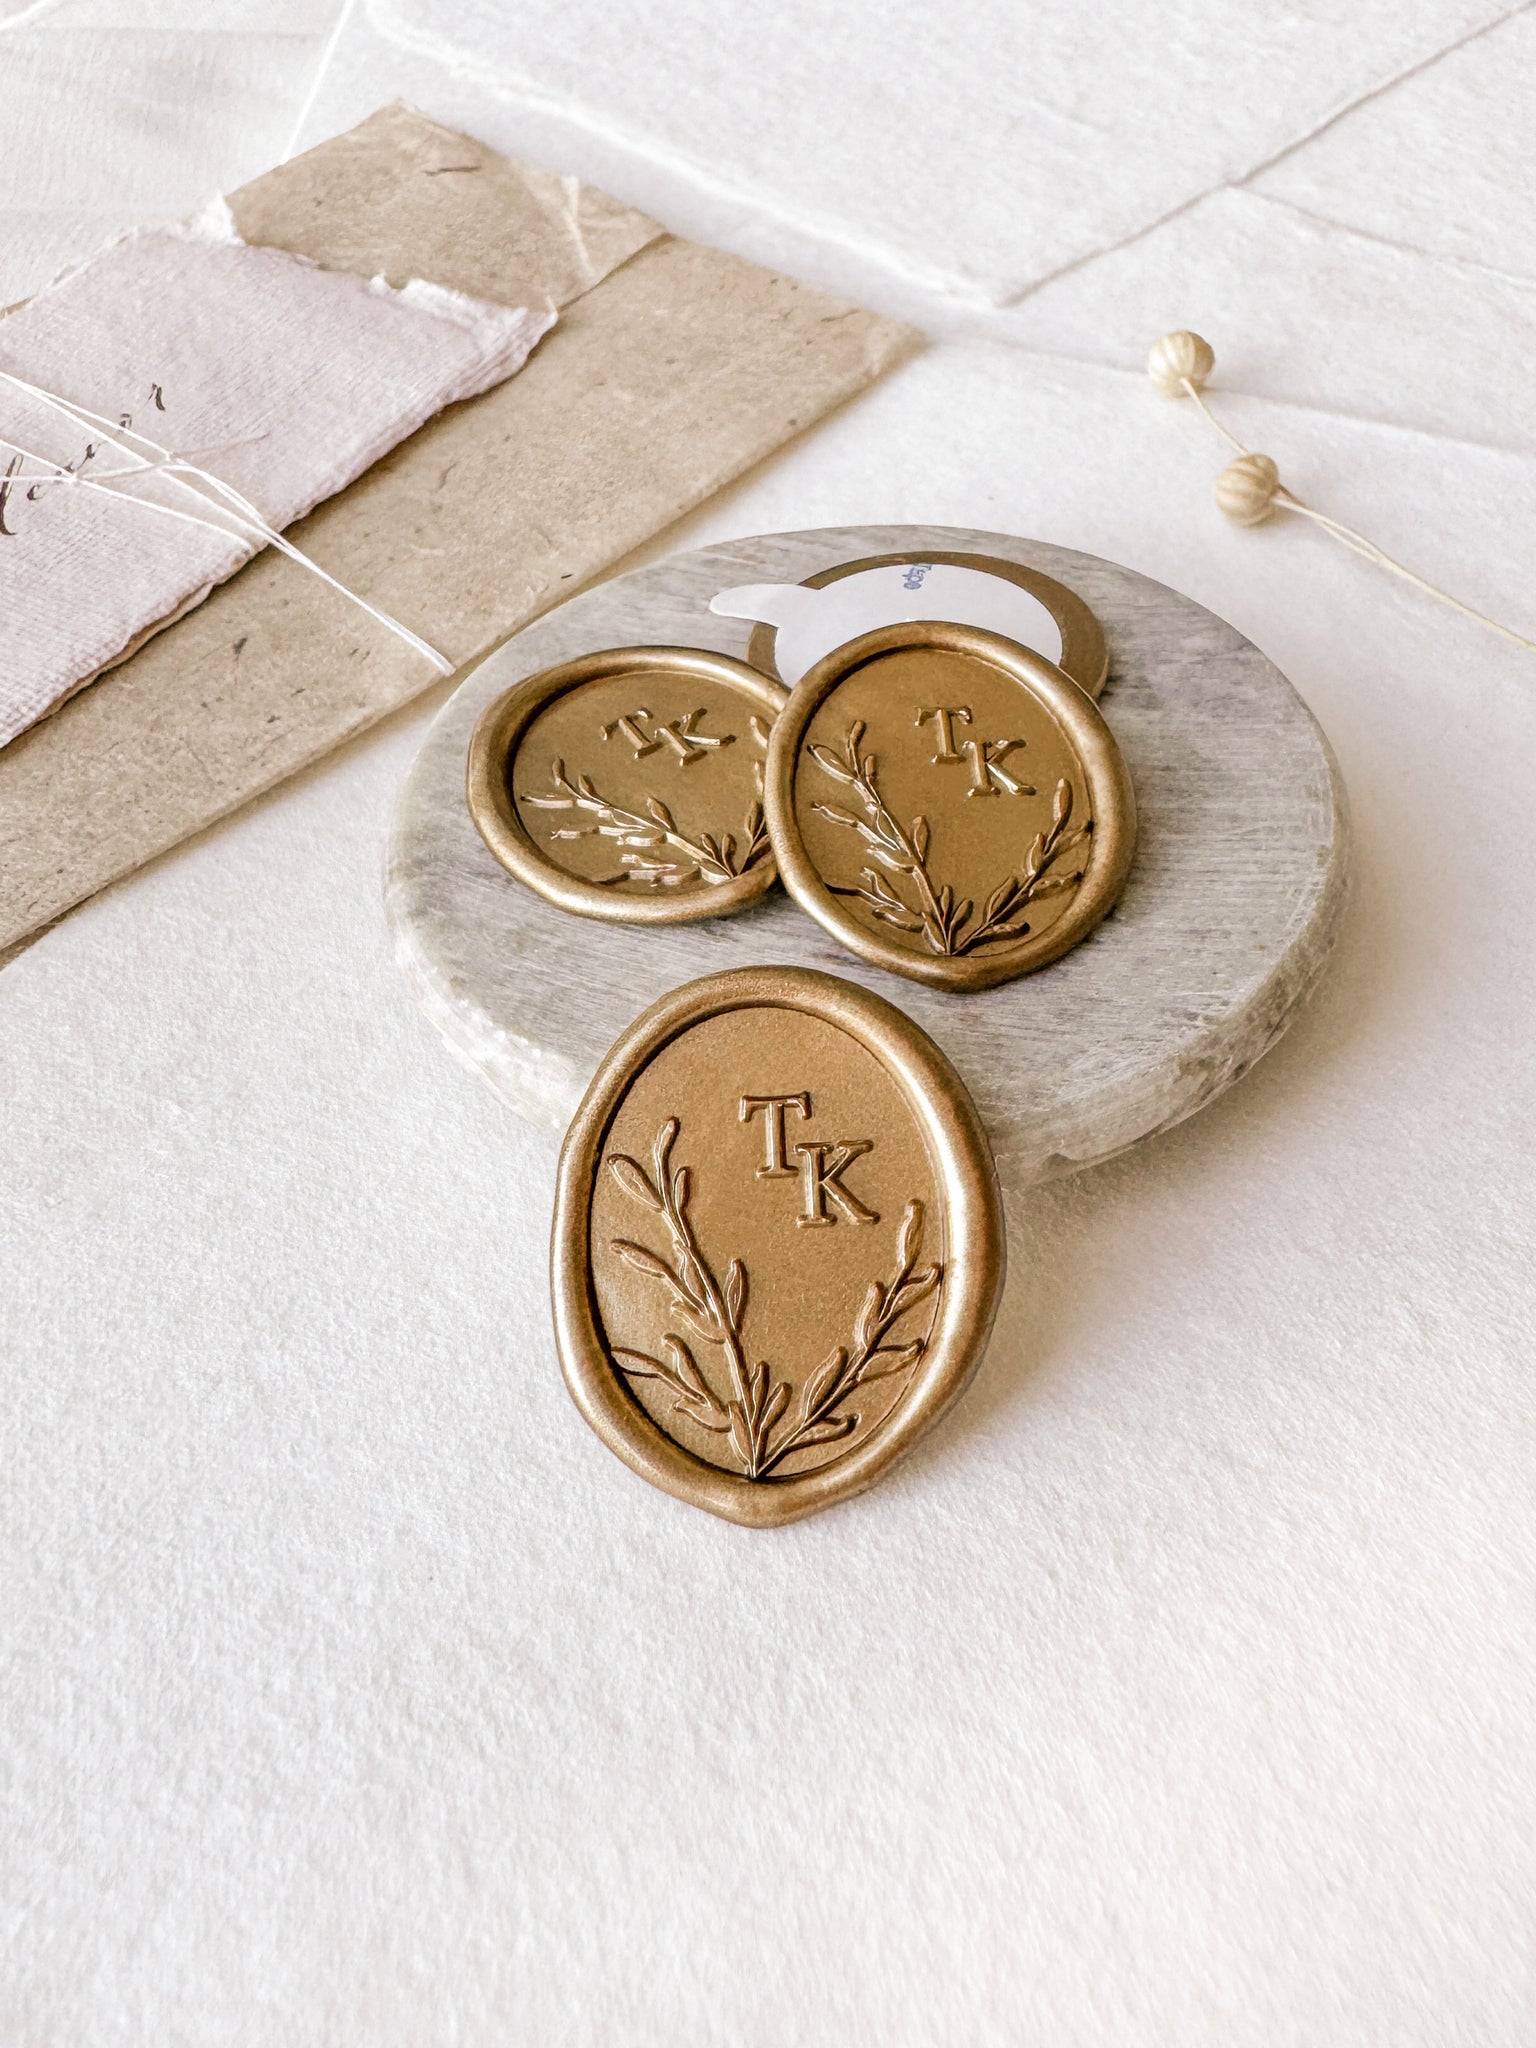 Leaves wreath monogram oval custom wax seals in gold  styled with a small gray stone dish, handmade paper and a dried floral branch